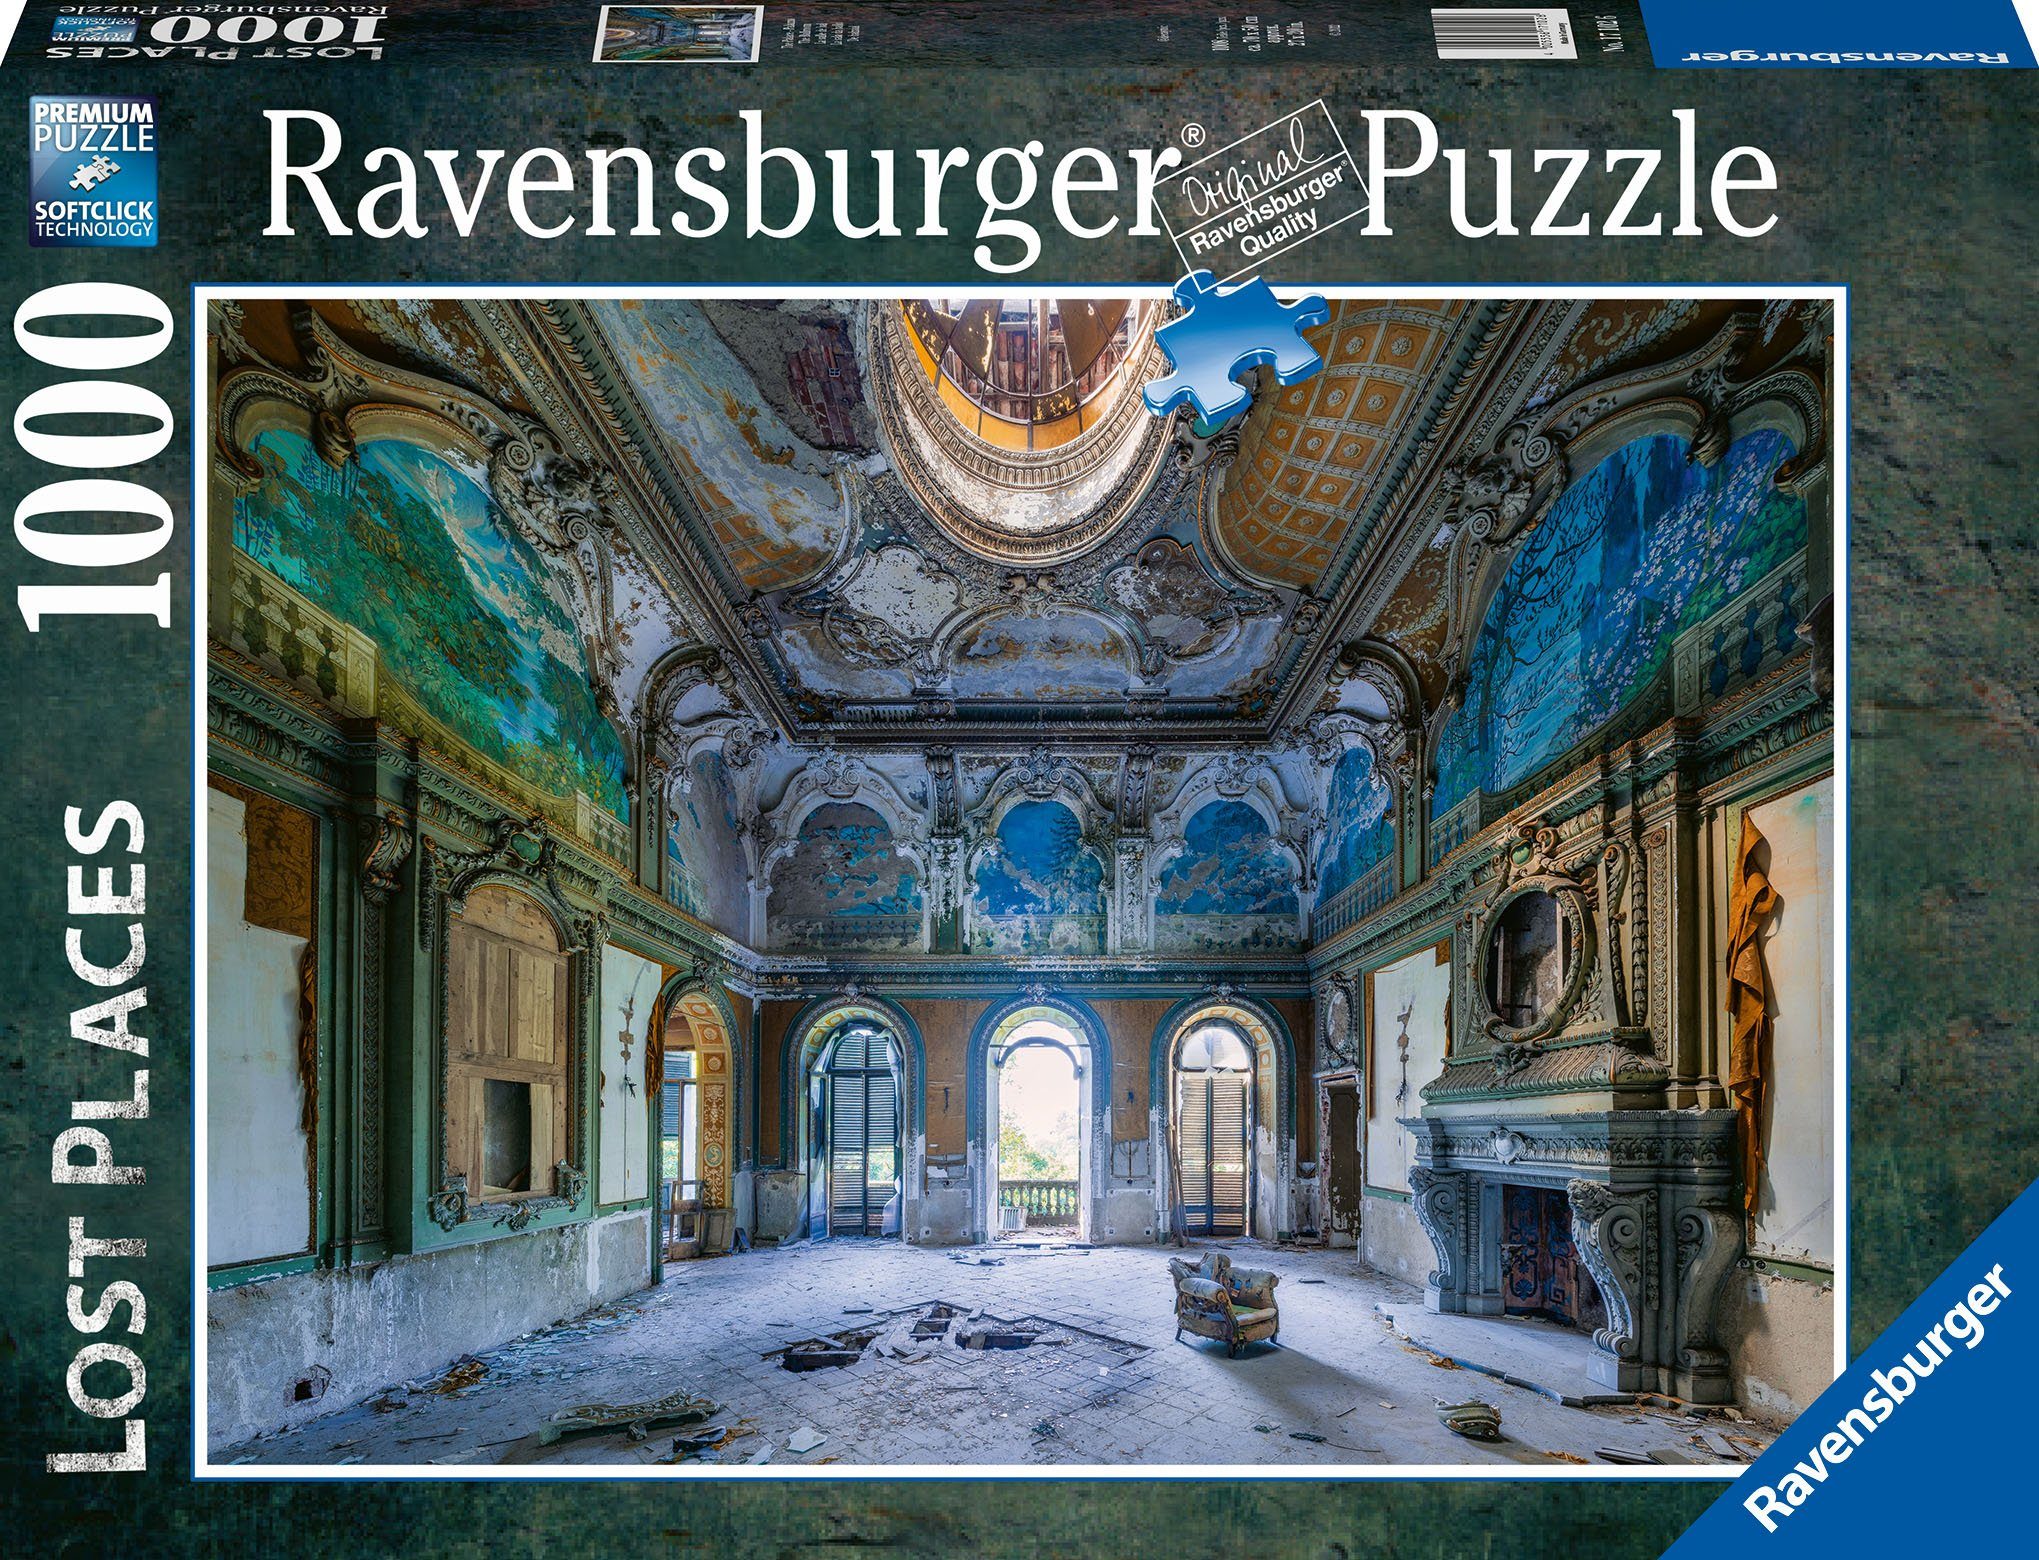 Ravensburger Puzzle Lost Places, The Palace, 1000 Puzzleteile, Made in Germany, FSC® - schützt Wald - weltweit